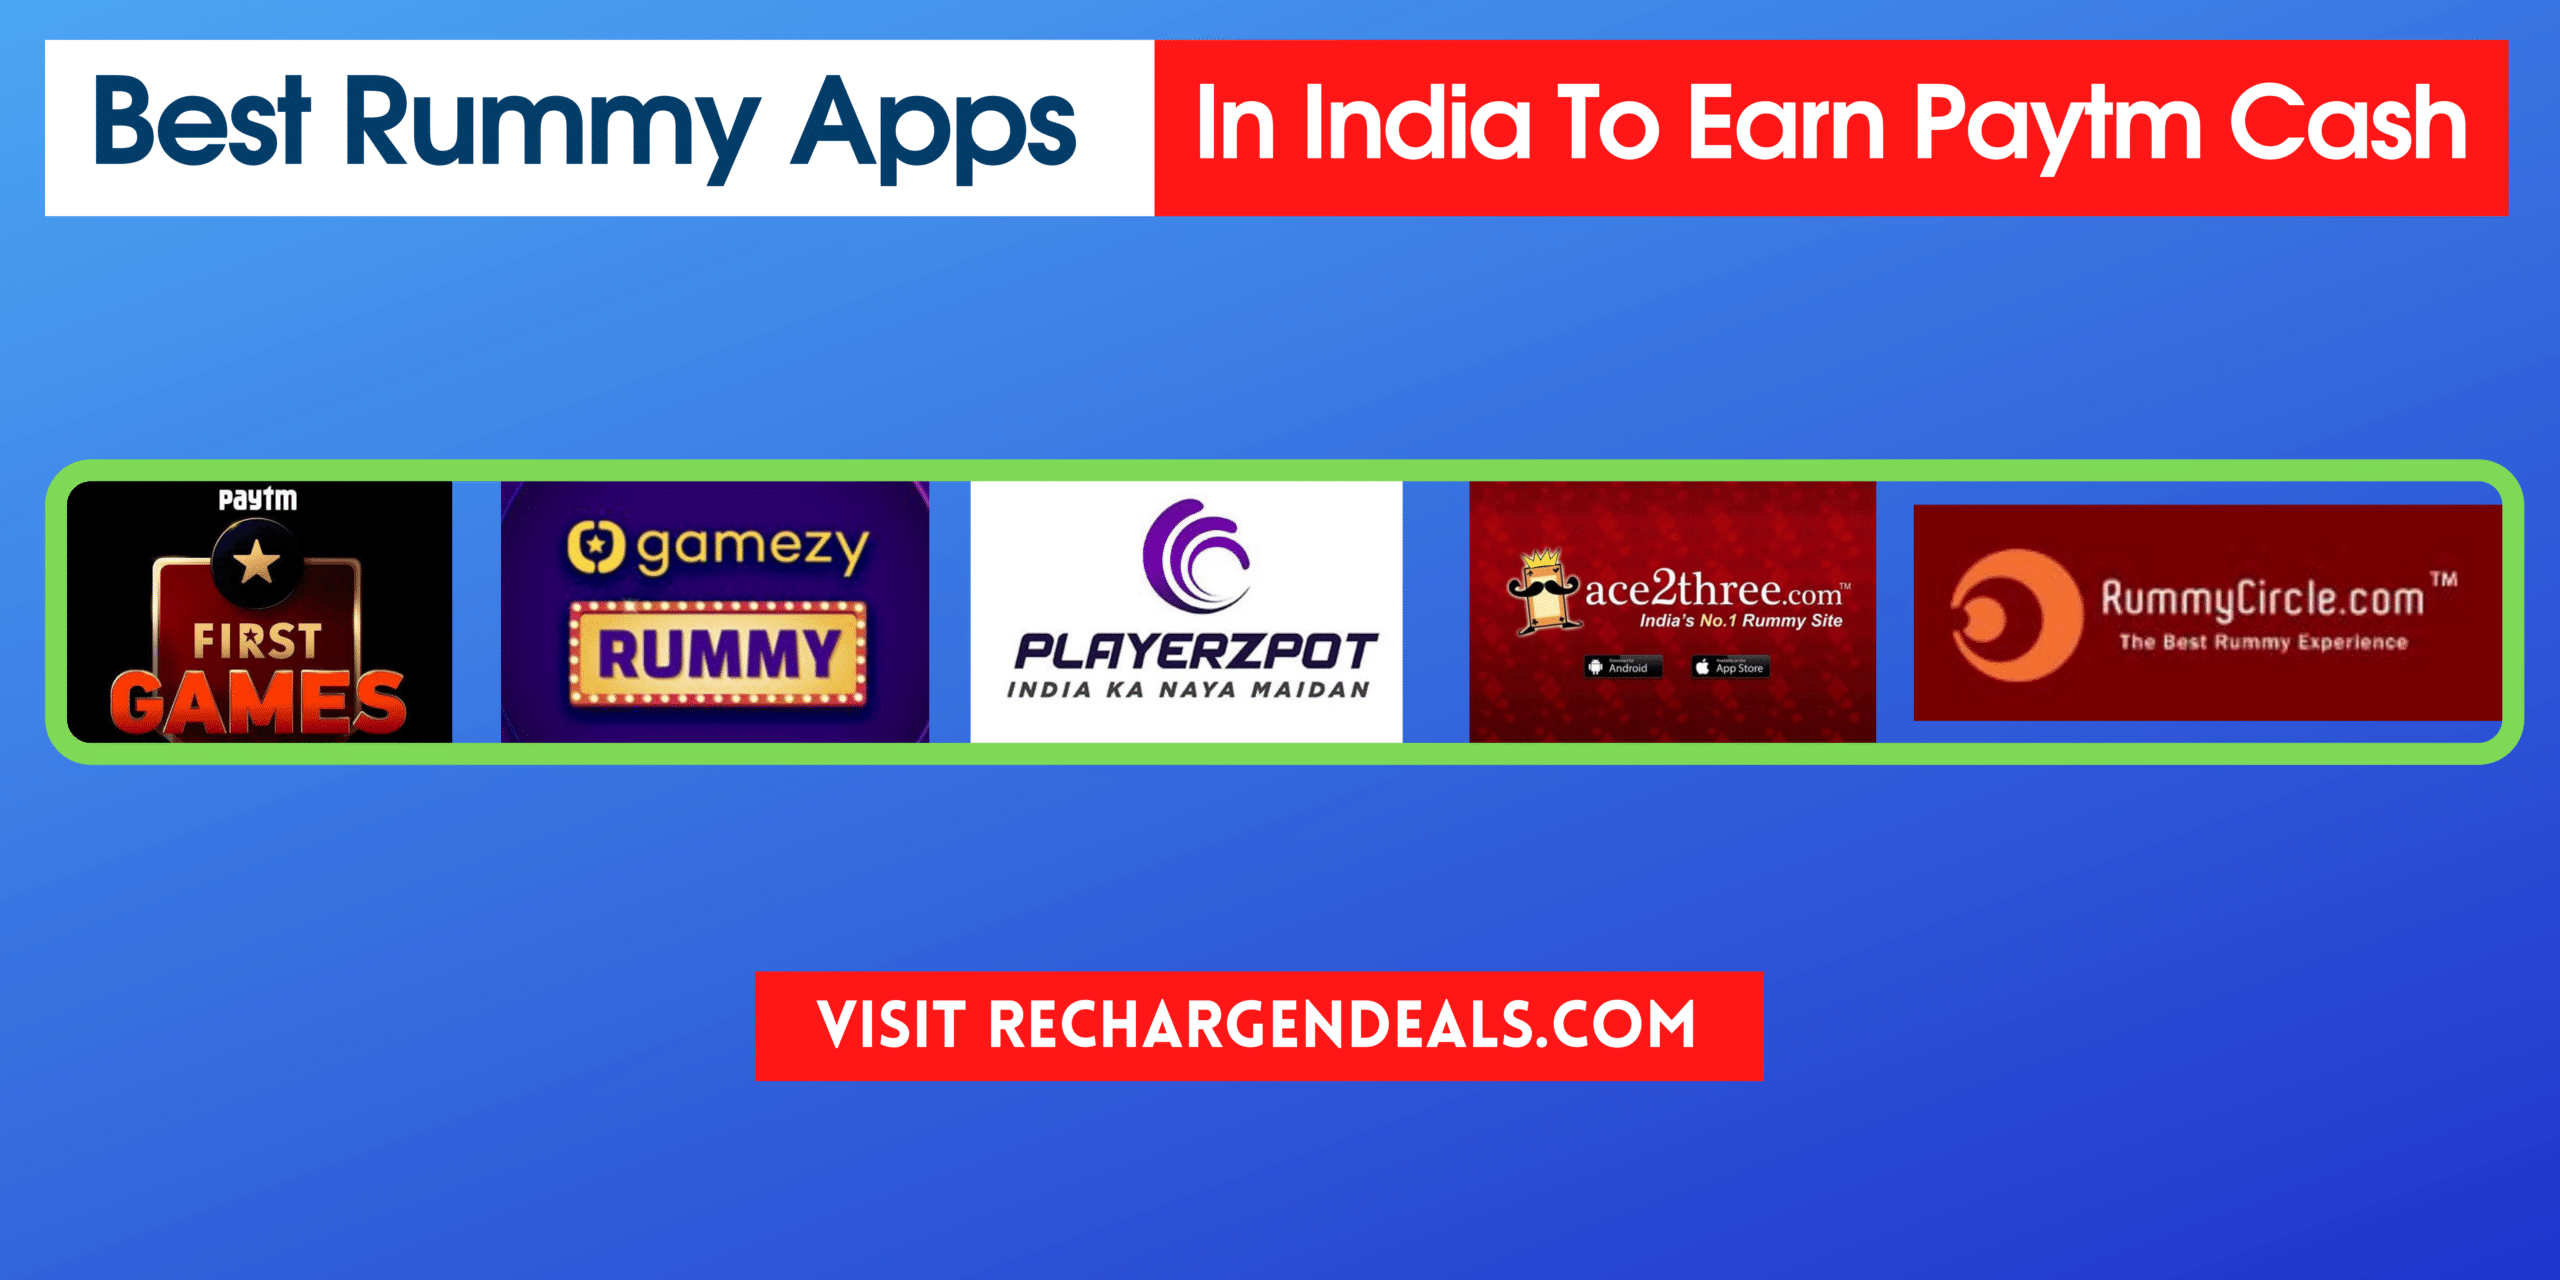 best rummy apps in india to earn paytm cash